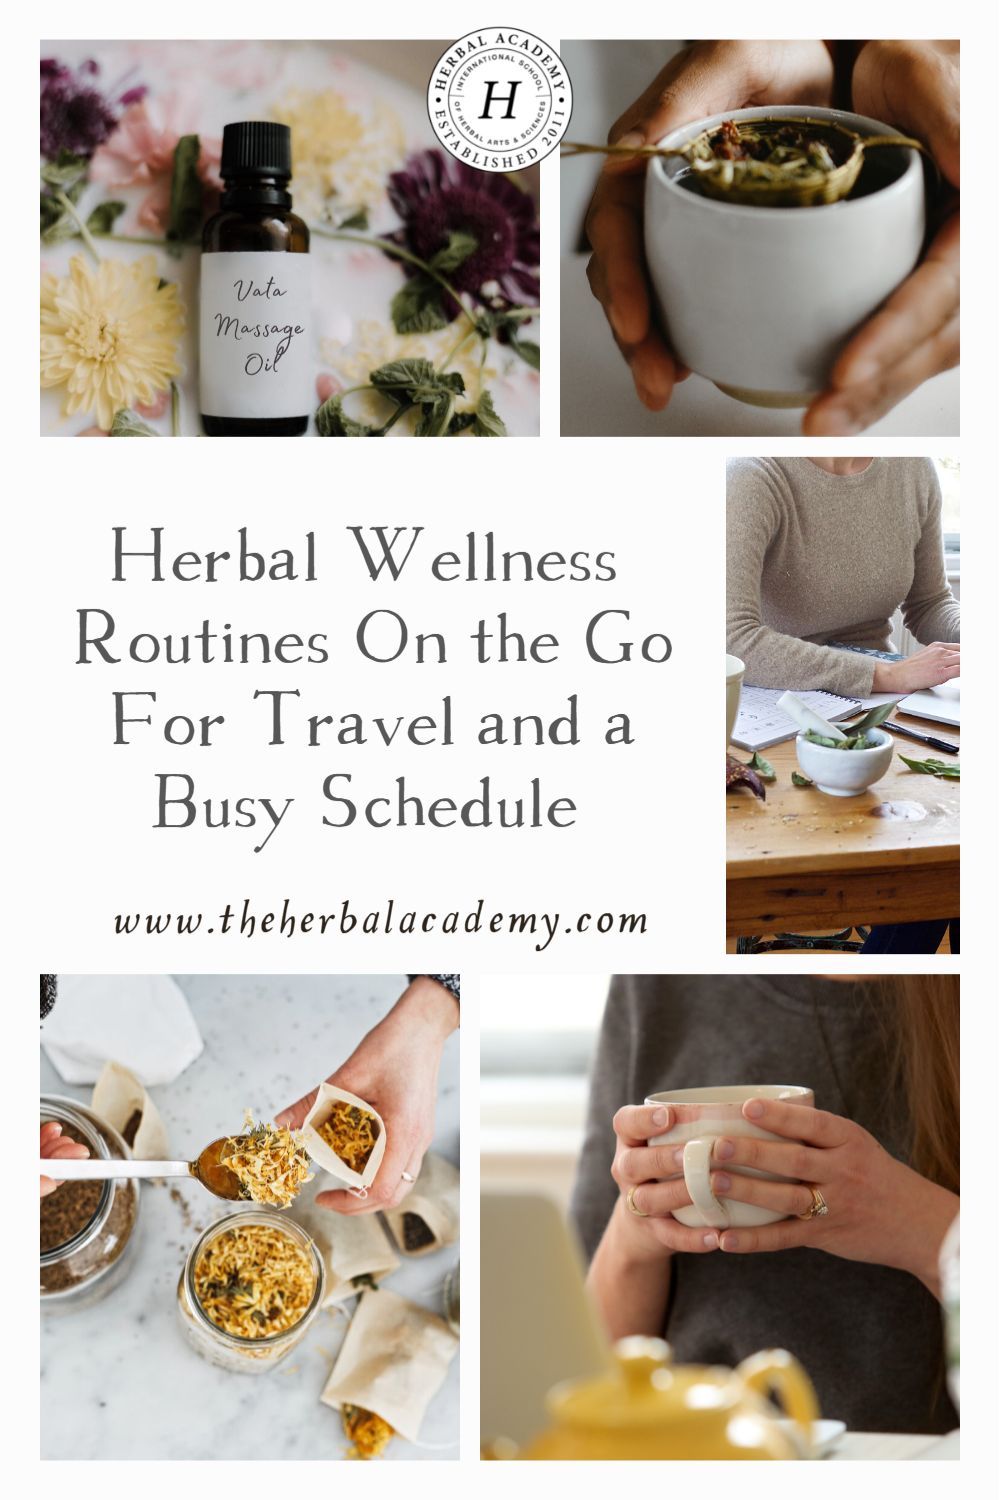 Herbal Wellness Routines On the Go For Travel and a Busy Schedule | Herbal Academy | Let’s take a look at some ideas for how to adapt your wellness routines for travel and particularly busy times.